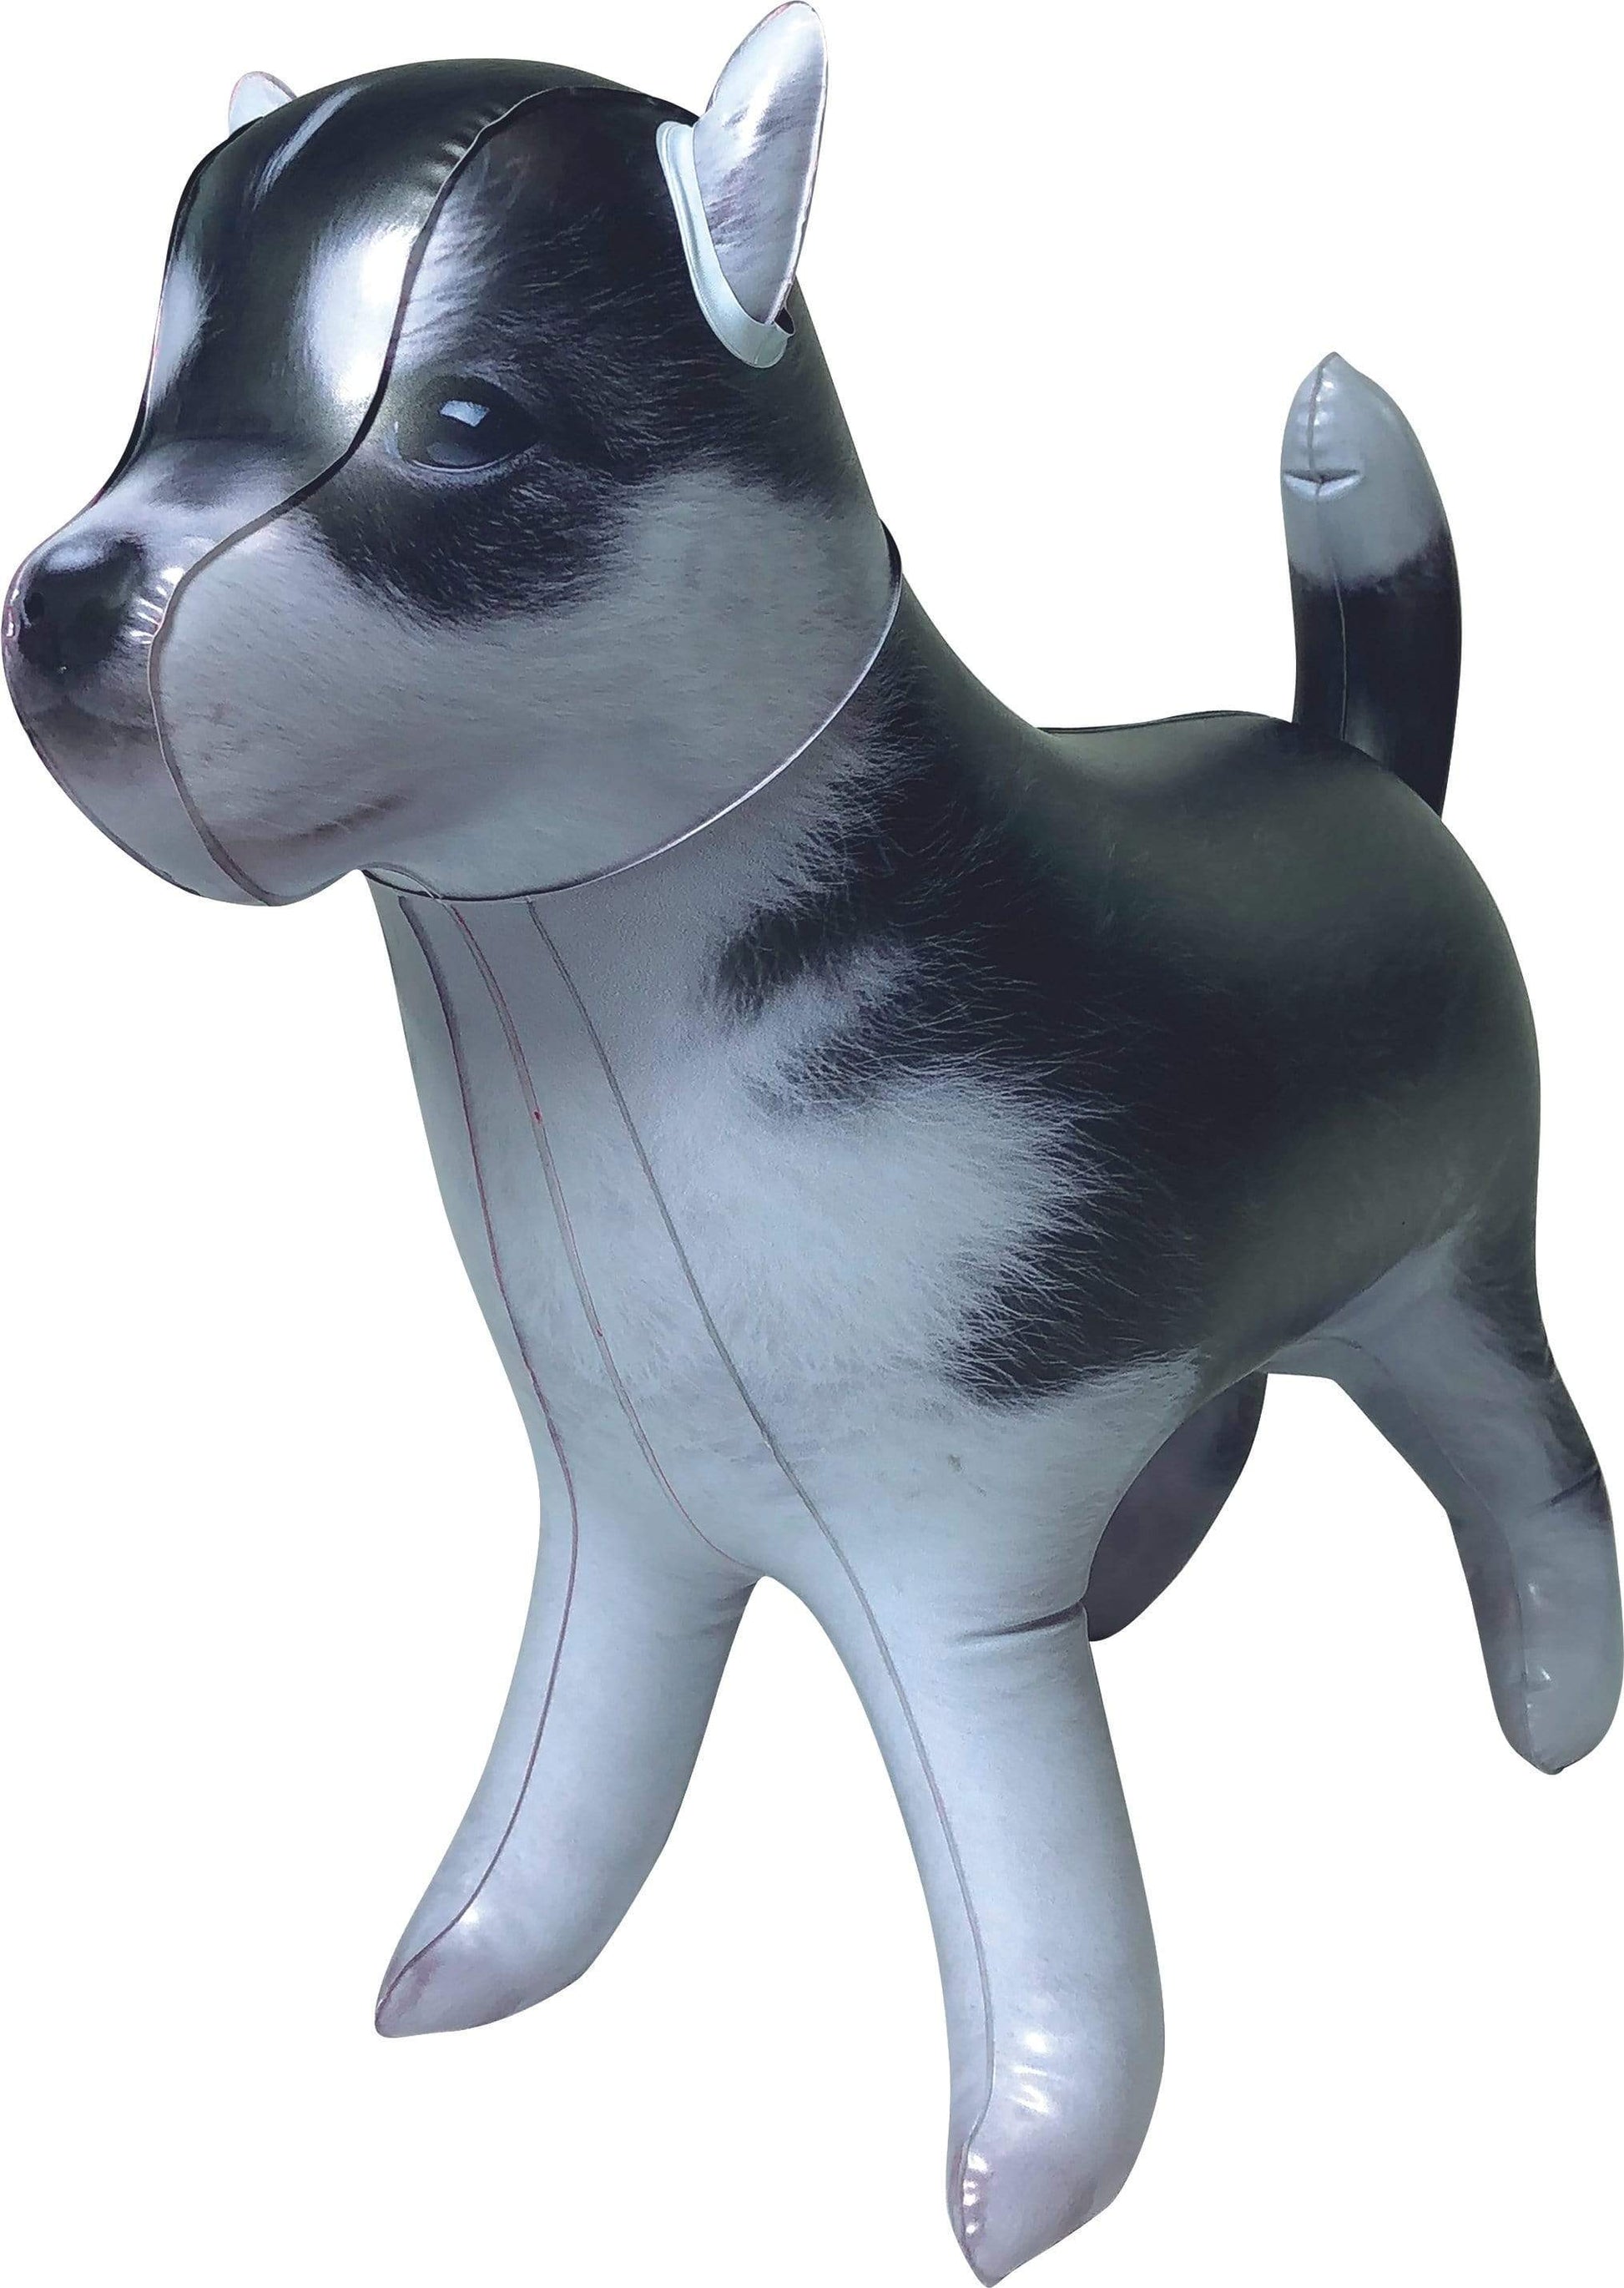 Large Dog Inflatable Mannequin